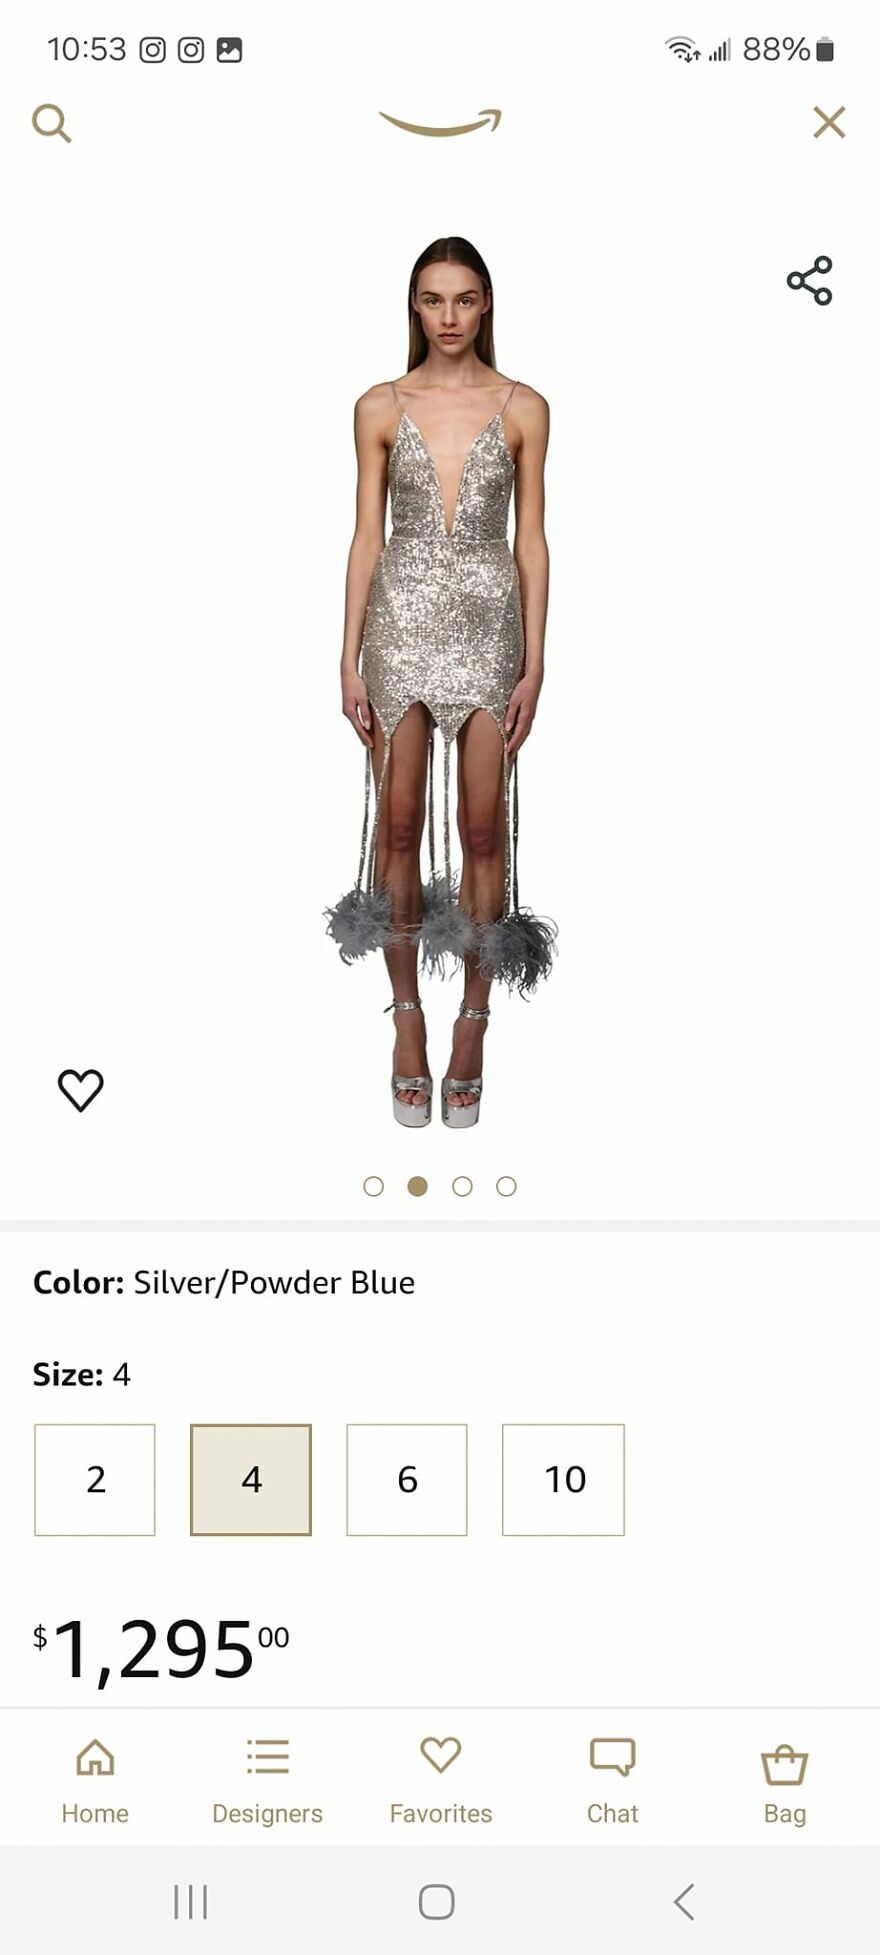 No, Thank You Amazon. That Dress Is Awful And Overpriced